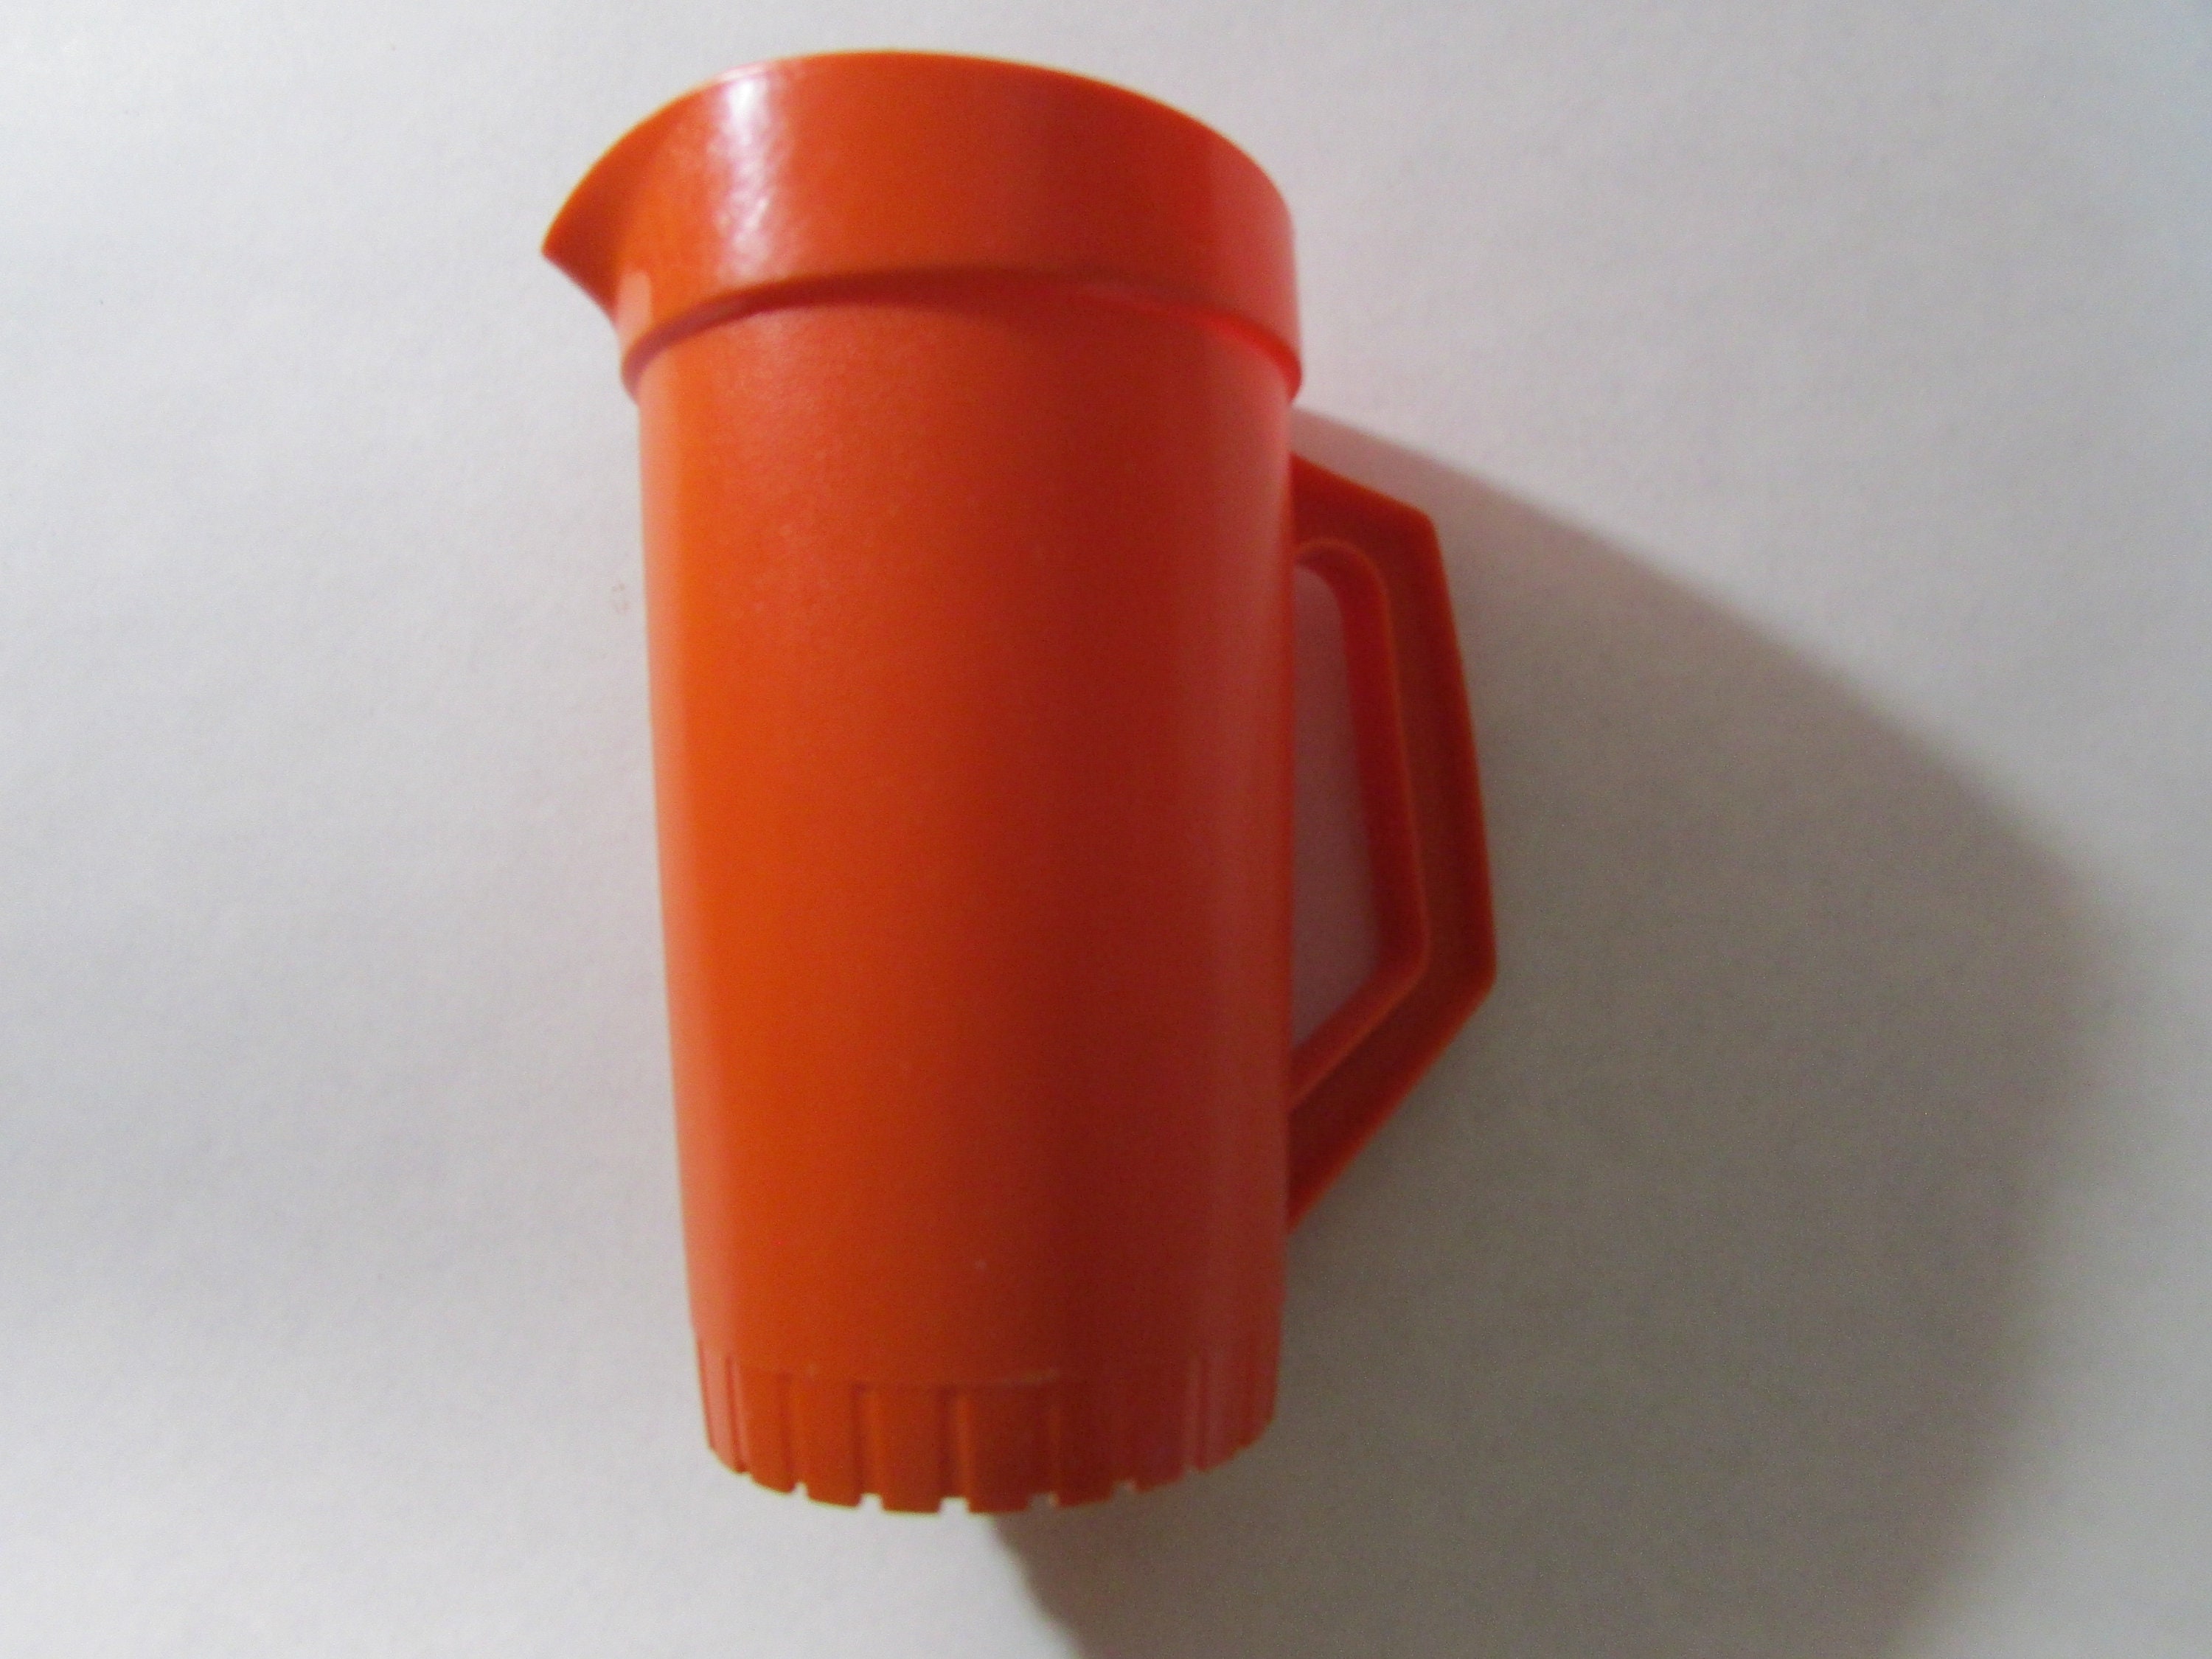 Tupperware Toys Mini Pitcher With Red Lid 1399-1